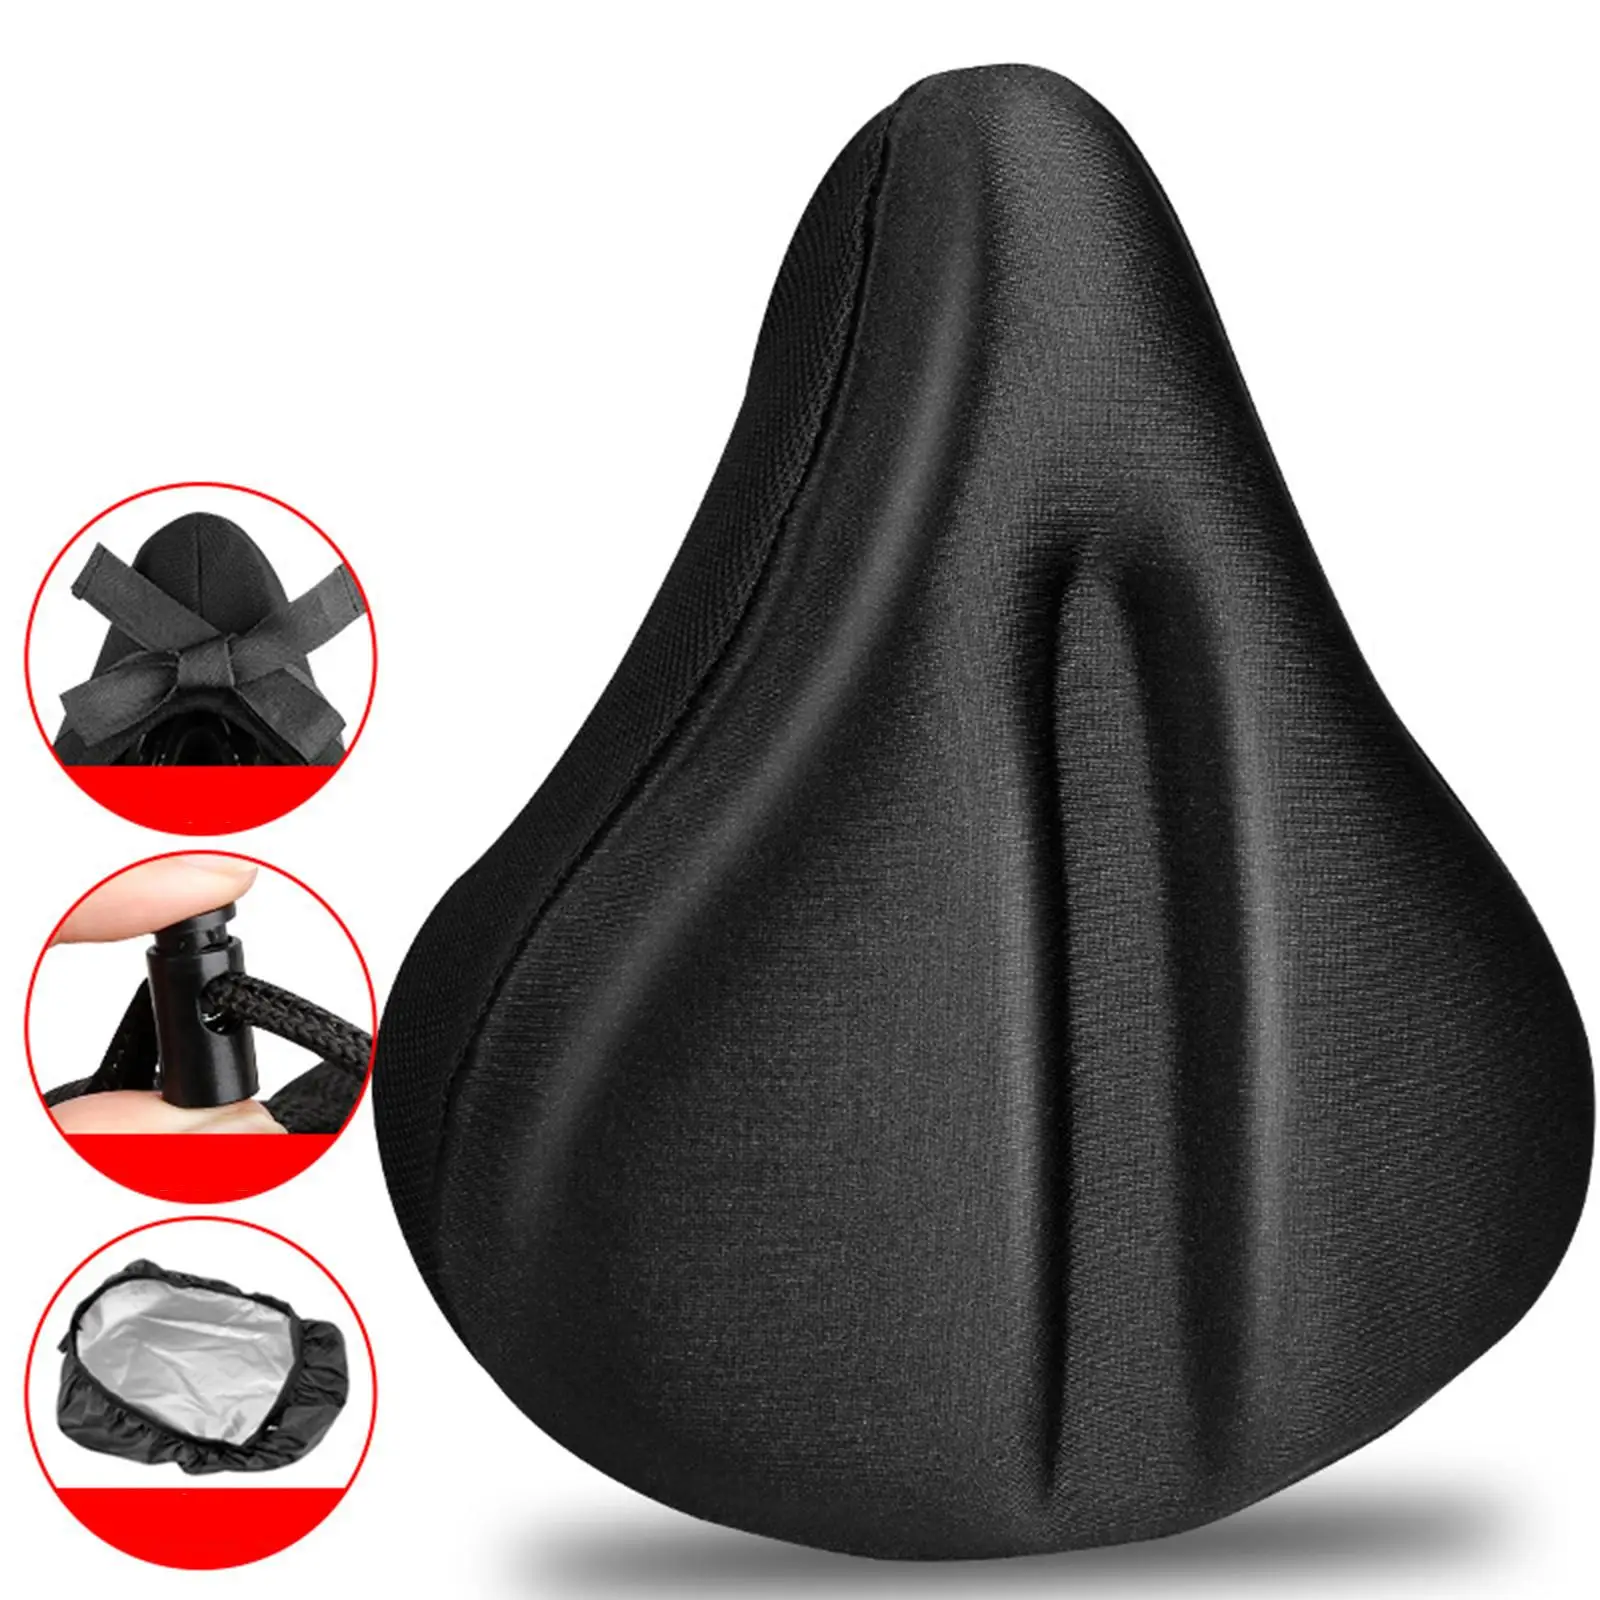 Bike Seat Cover Shock Absorption Thick Bike Saddle Seat Cover for Exercise Bike Road Bike Cycling Accessories Folding Bike Adult